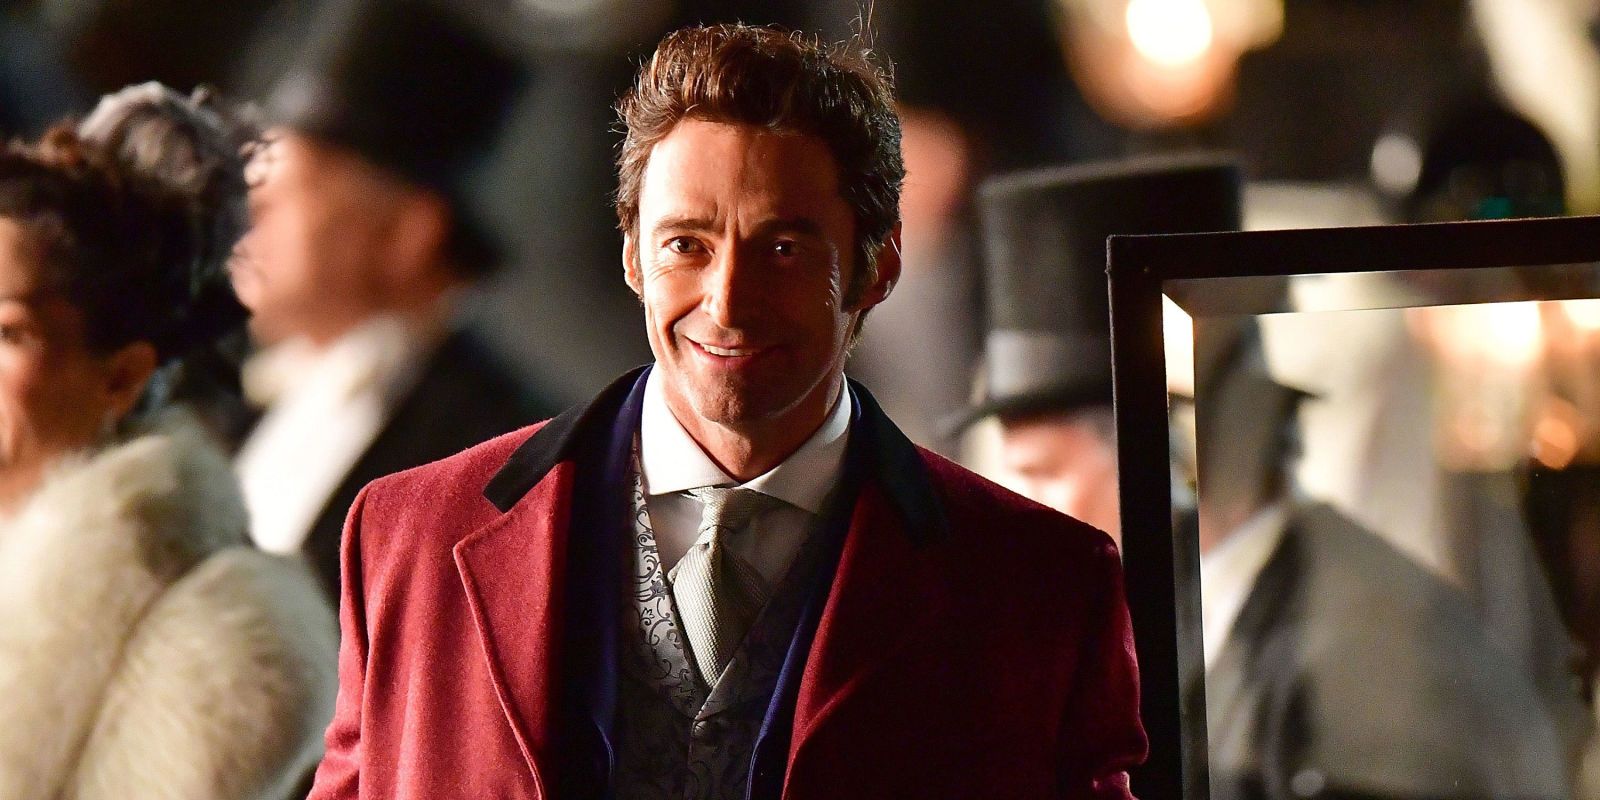 Is The Greatest Showman On Netflix?